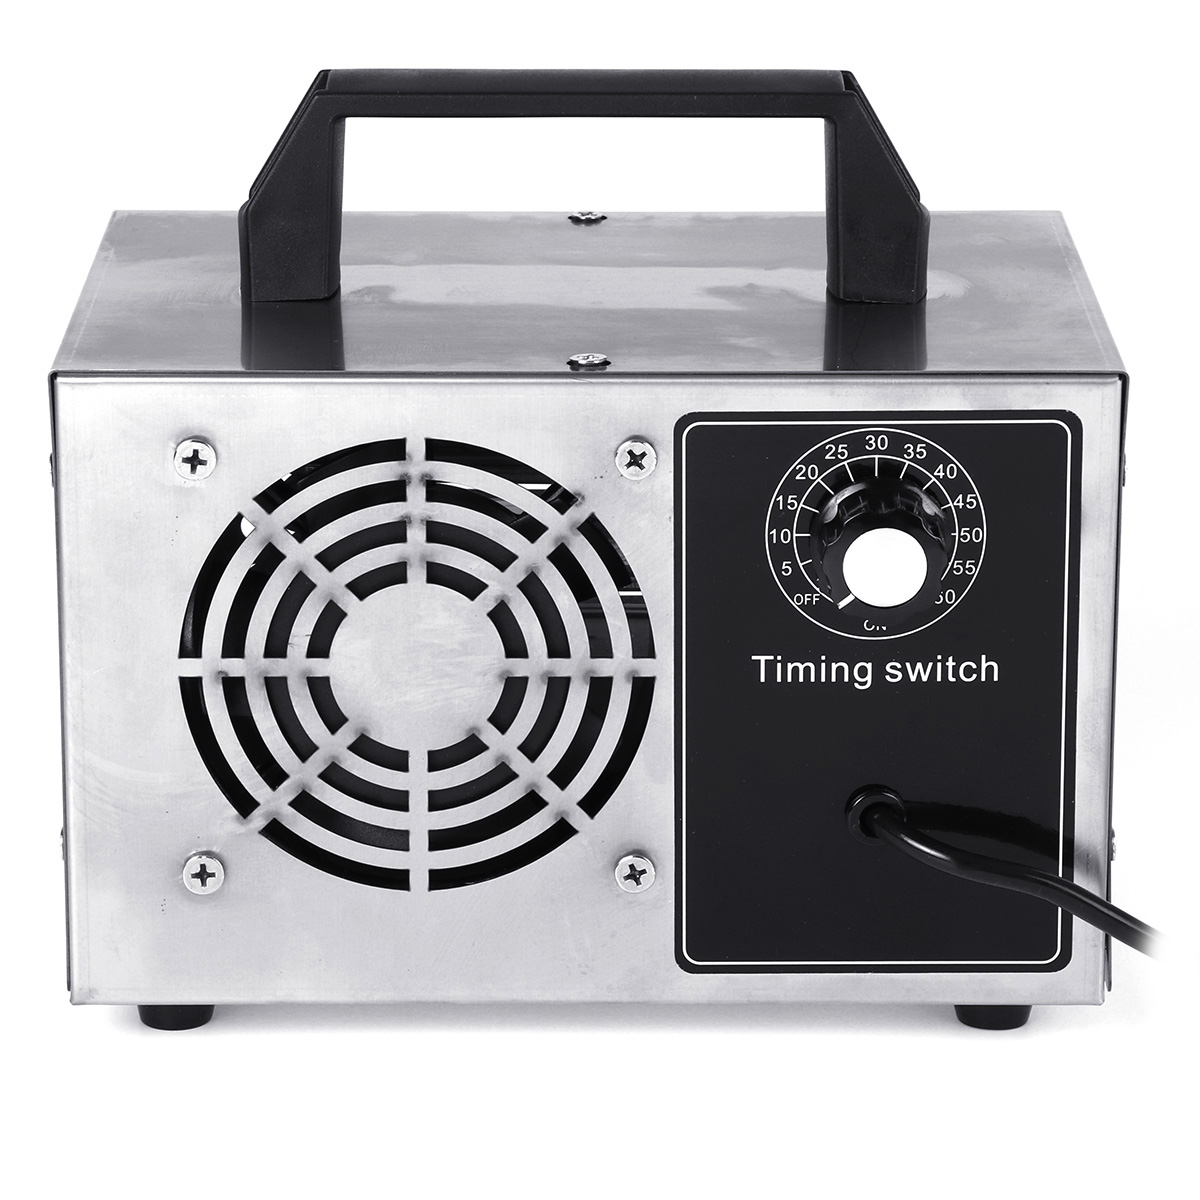 220V-Ozone-Generator-Commercial-Long-Life-Timing-Purifier-Air-Cleaner-Deodorizer-1710921-5